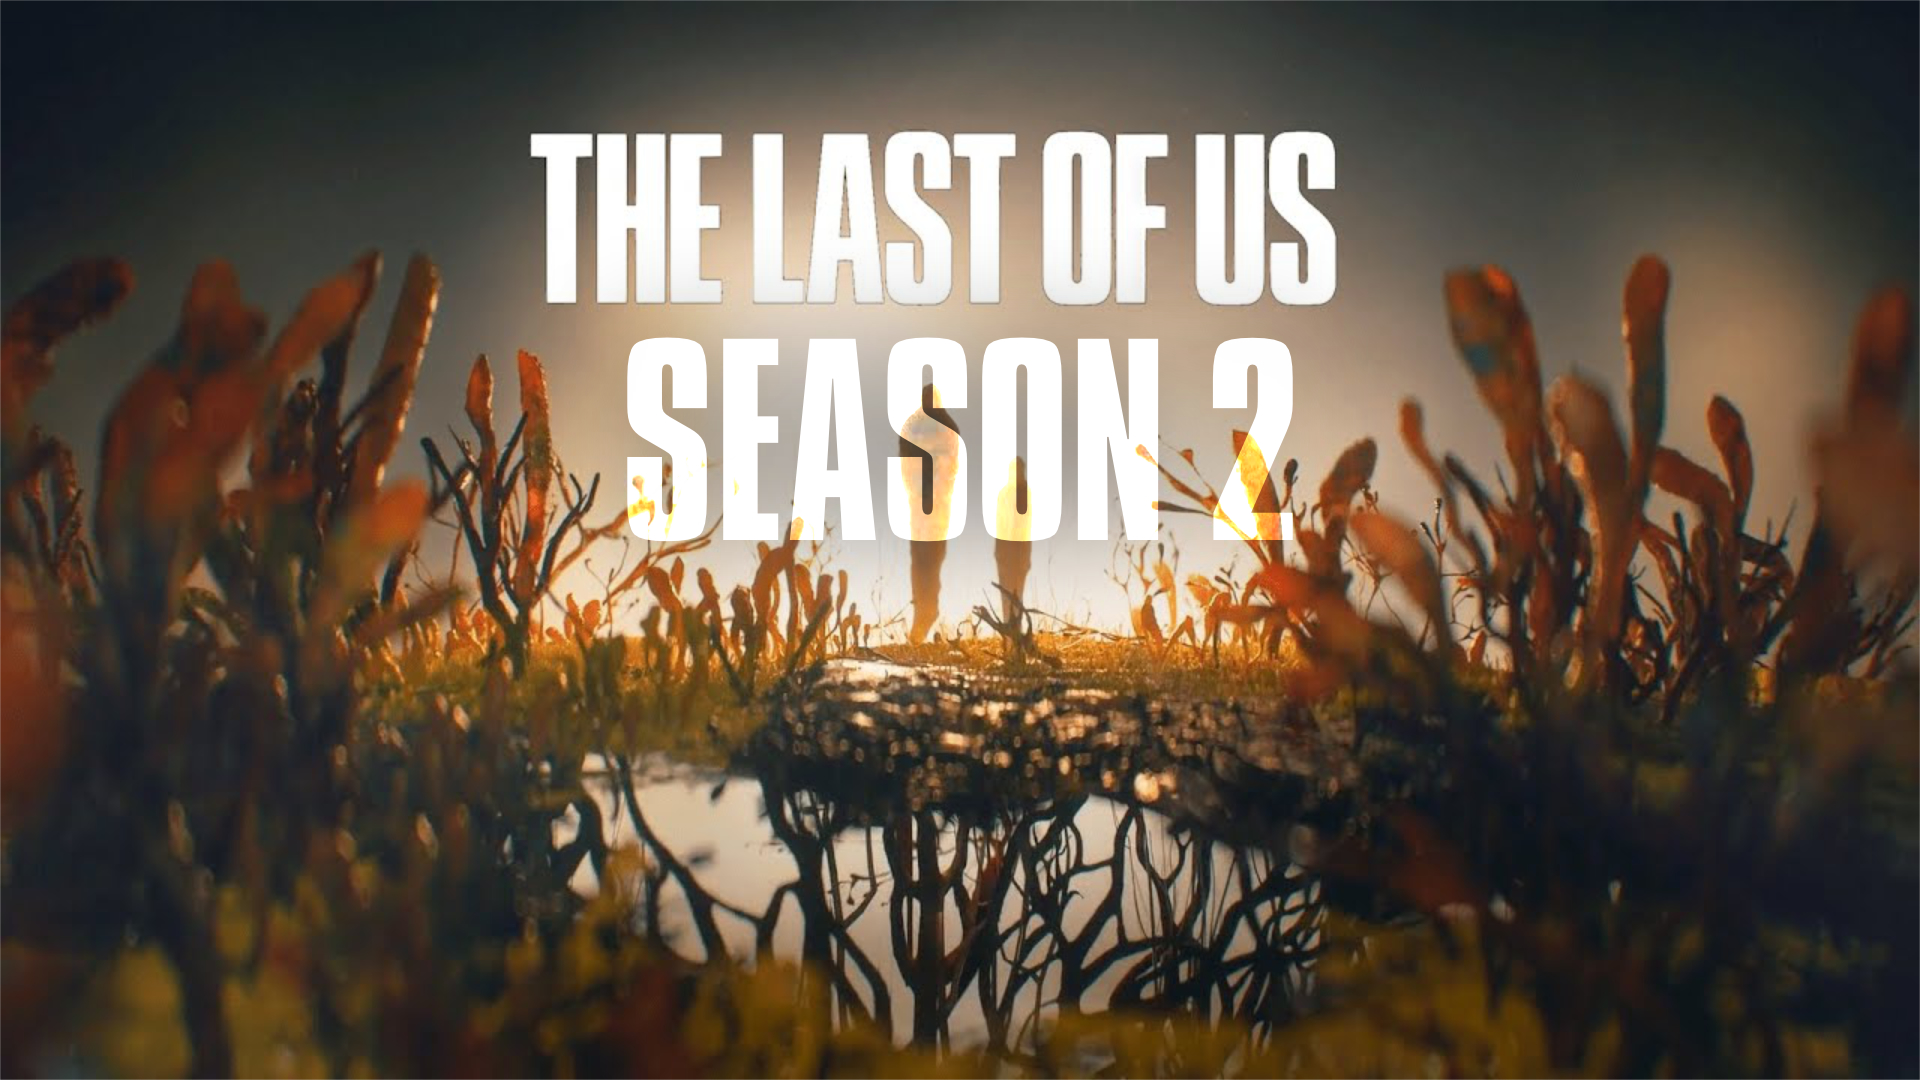 The Last of Us Season 2 may start filming in 2023